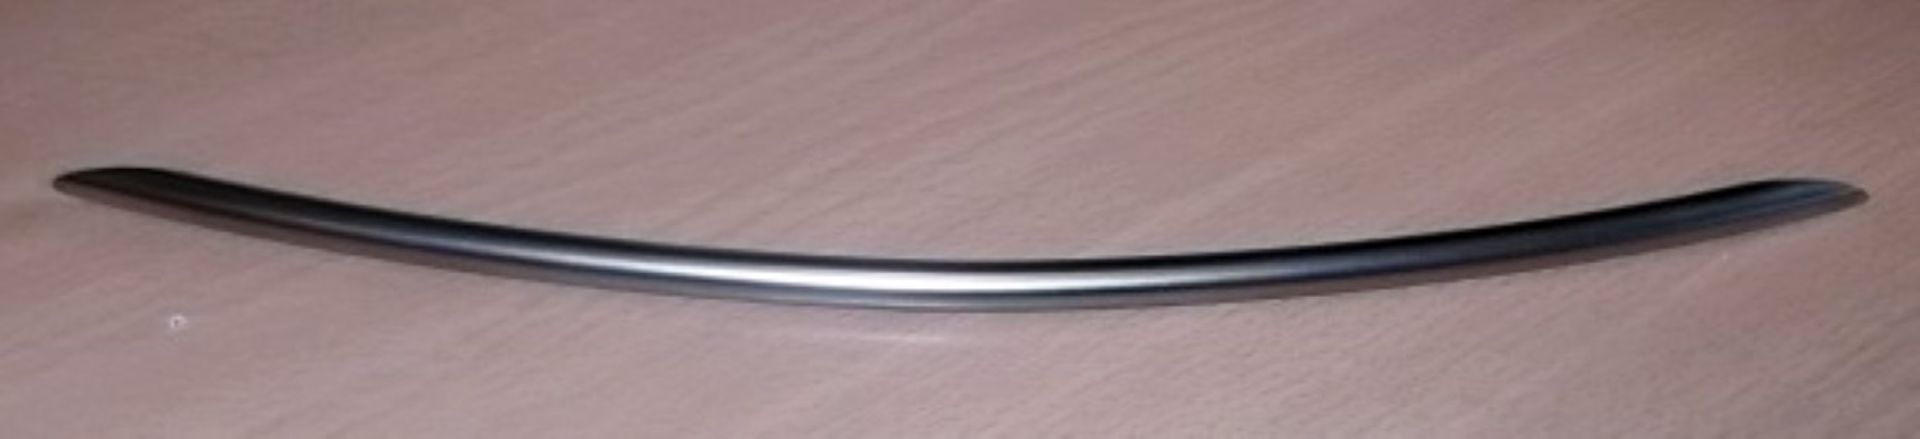 250 x BOW Handle Kitchen Door Handles By Crestwood - 320mm - New Stock - Brushed Nickel Finish - - Image 6 of 10